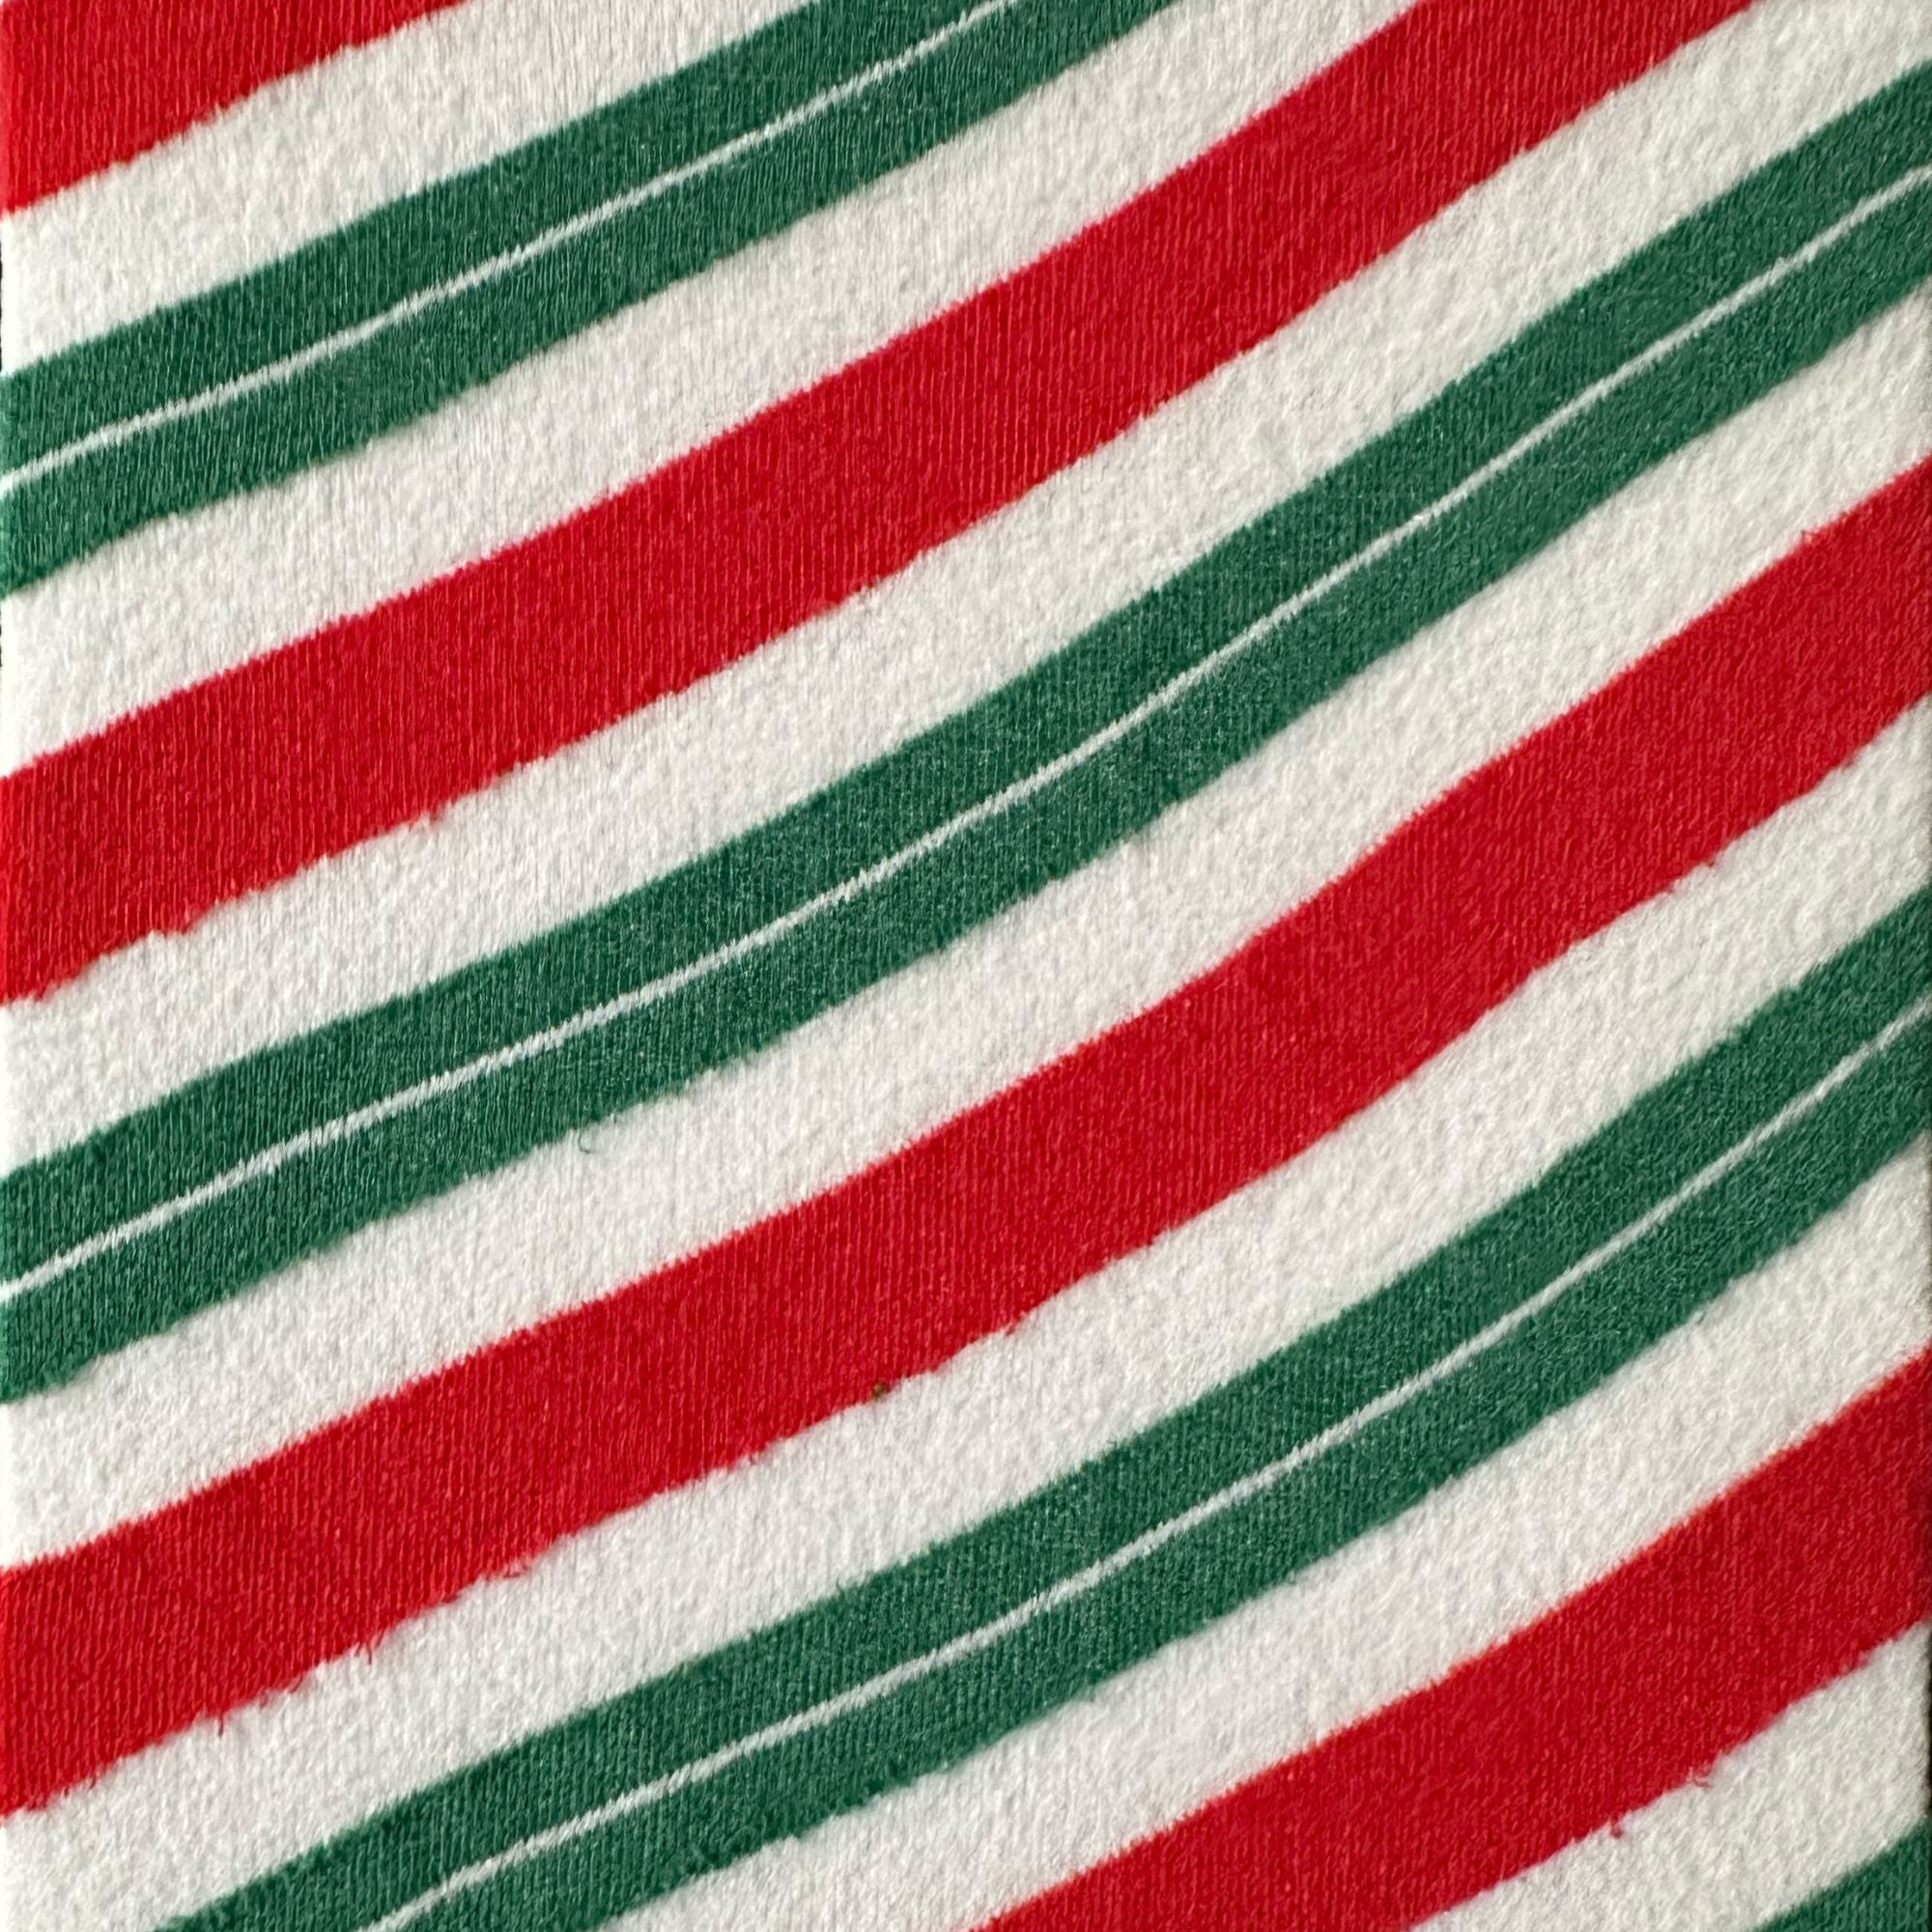 Layered Striped Red, Green & White Tights - The Best Christmas tights